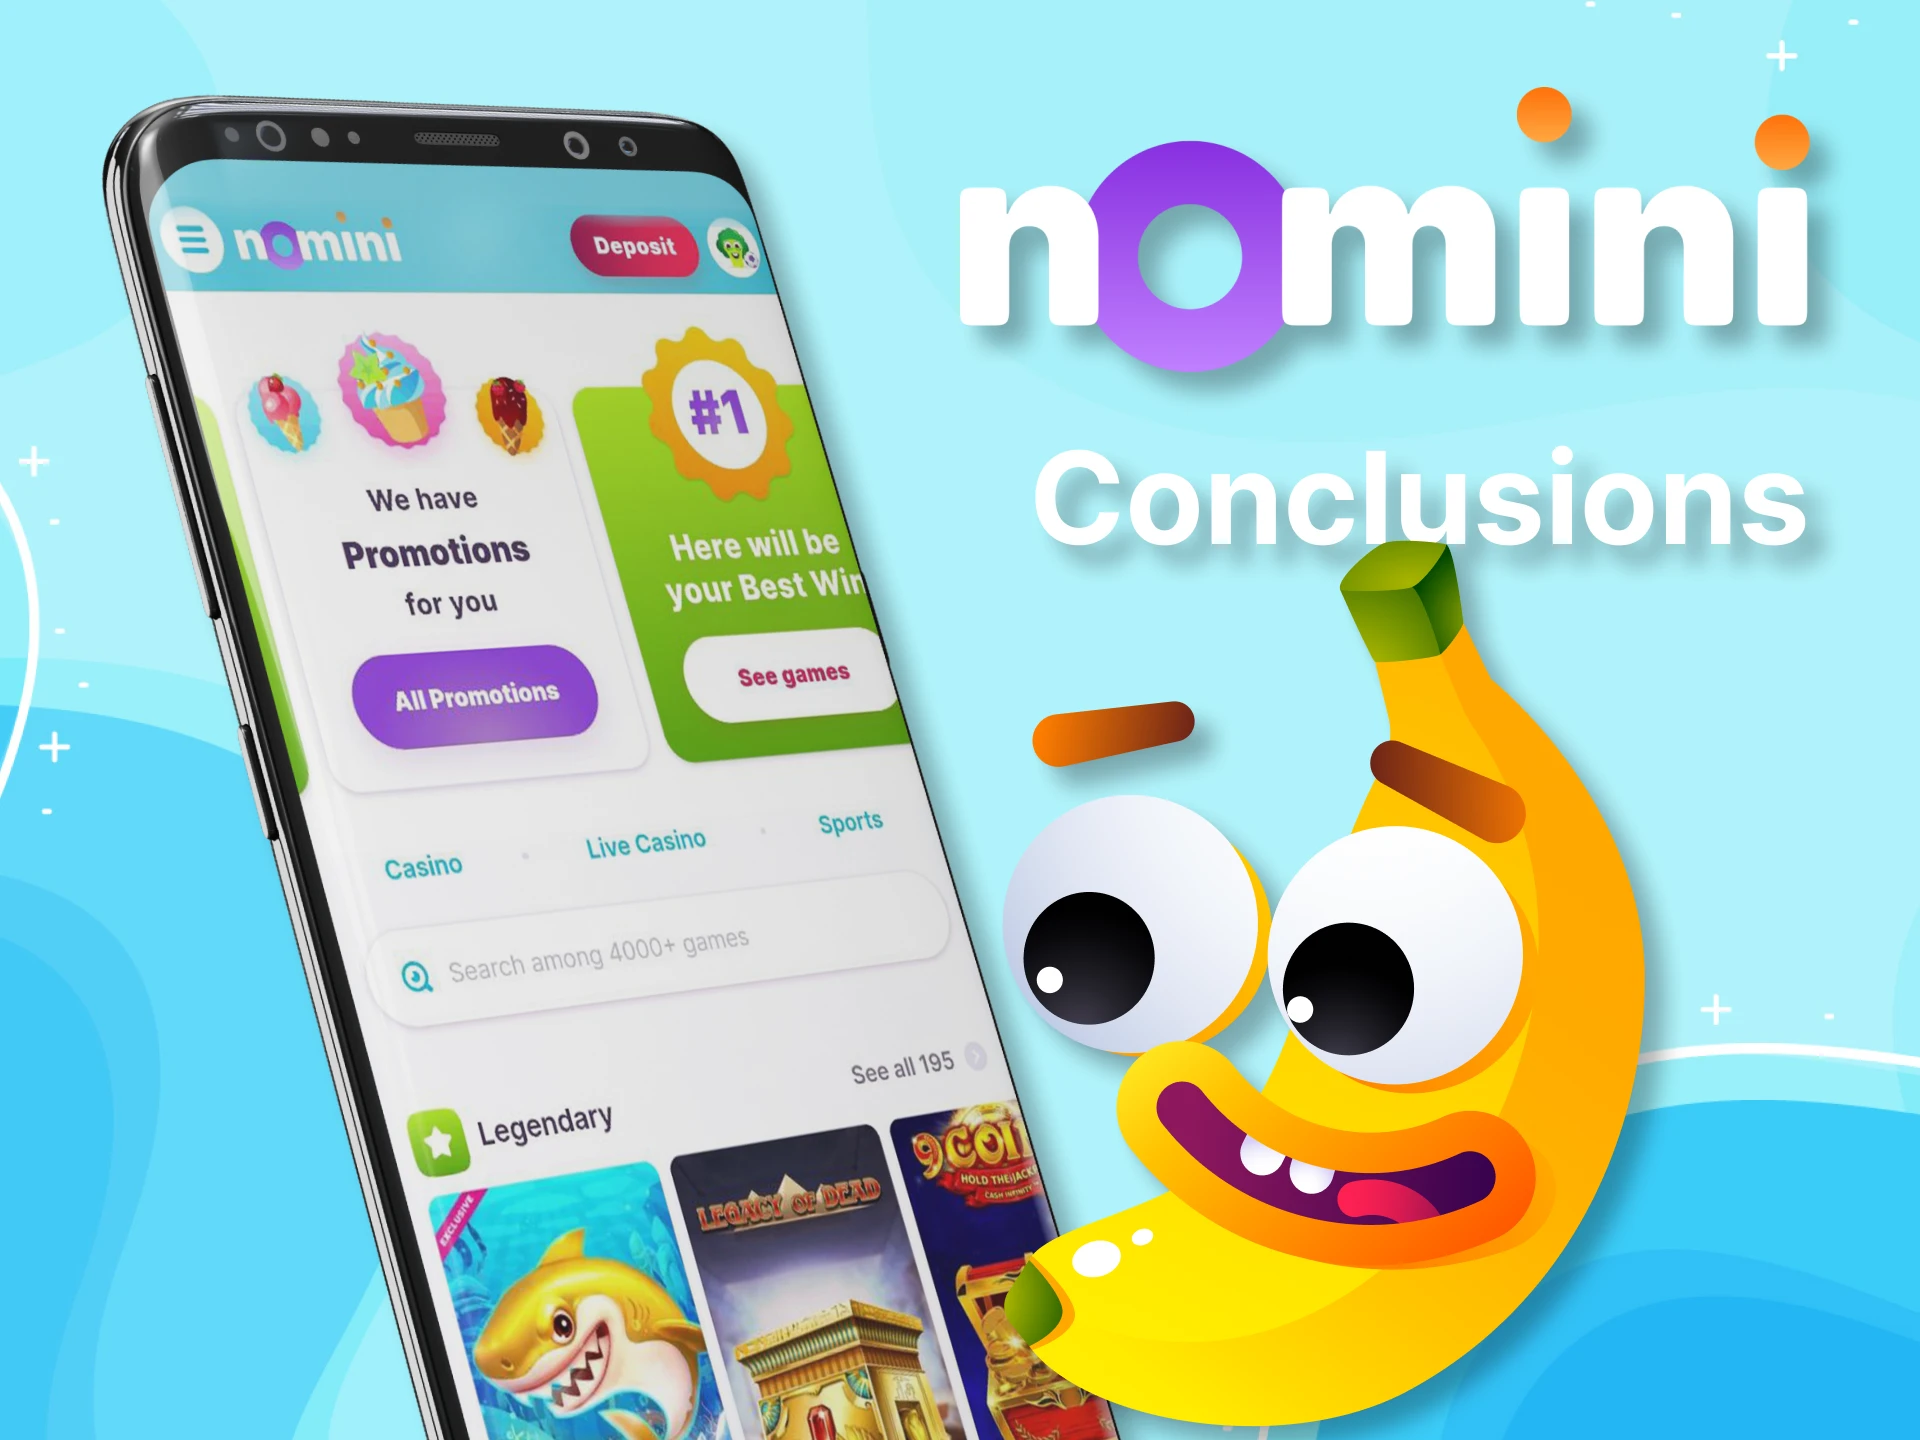 It is worth noting that the Nomini app is very player-friendly and safe.